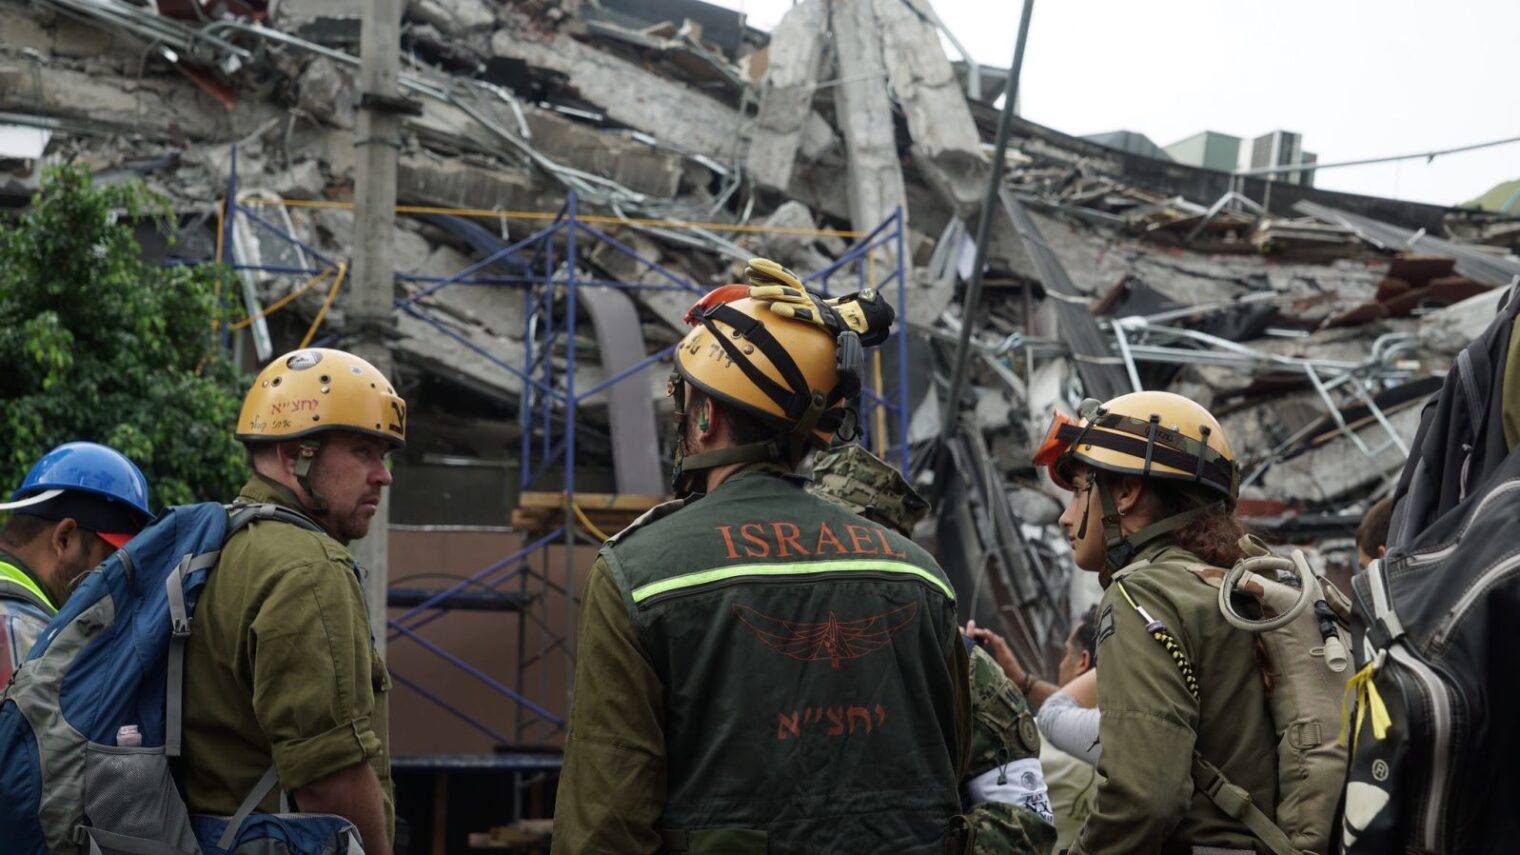 Israel Defense Forces humanitarian aid team in Mexico after the 2017 earthquake. Photo courtesy of IDF Spokesperson’s Office